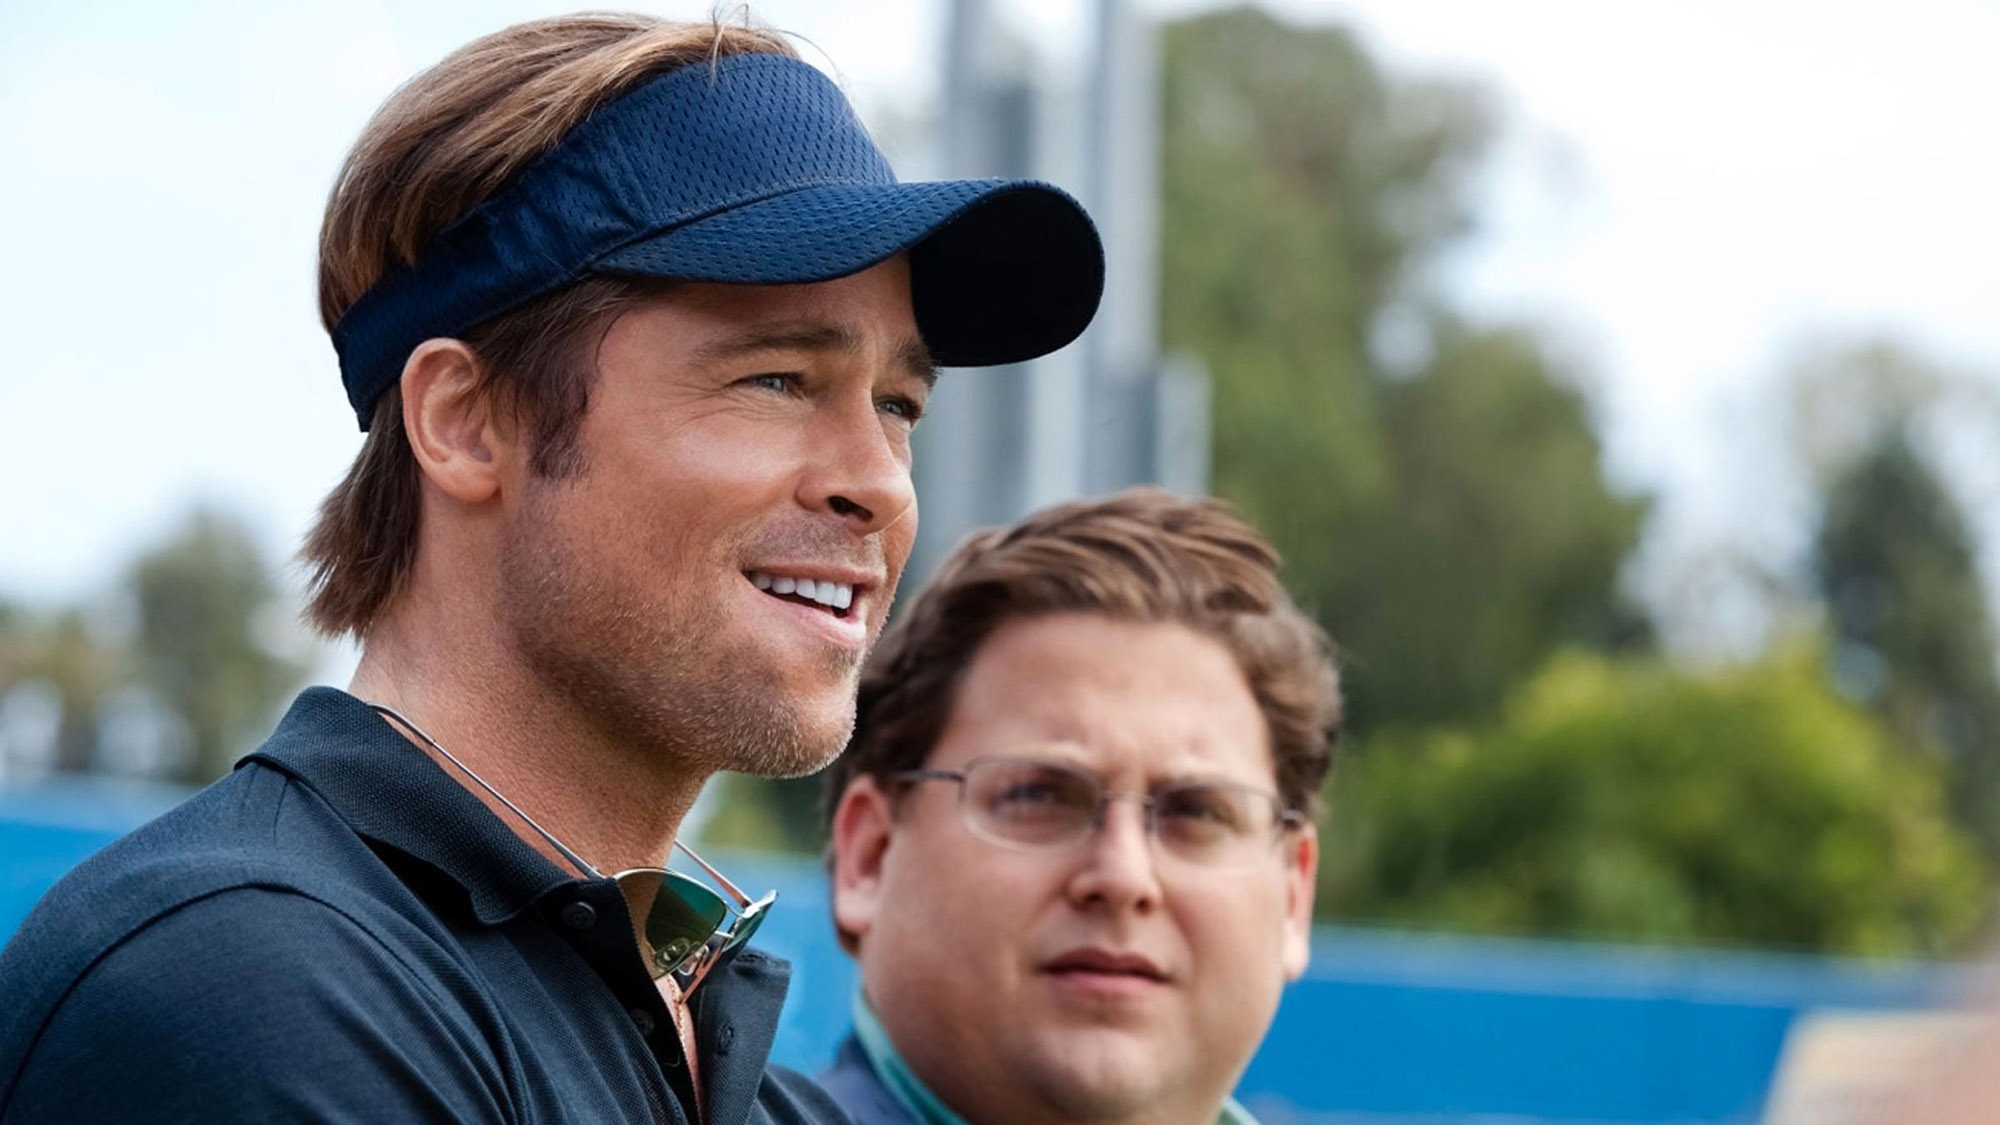 (L to R) Brad Pitt as Billy Beane and Jonah Hill as Peter Brand in Moneyball, one of the best Netflix movies